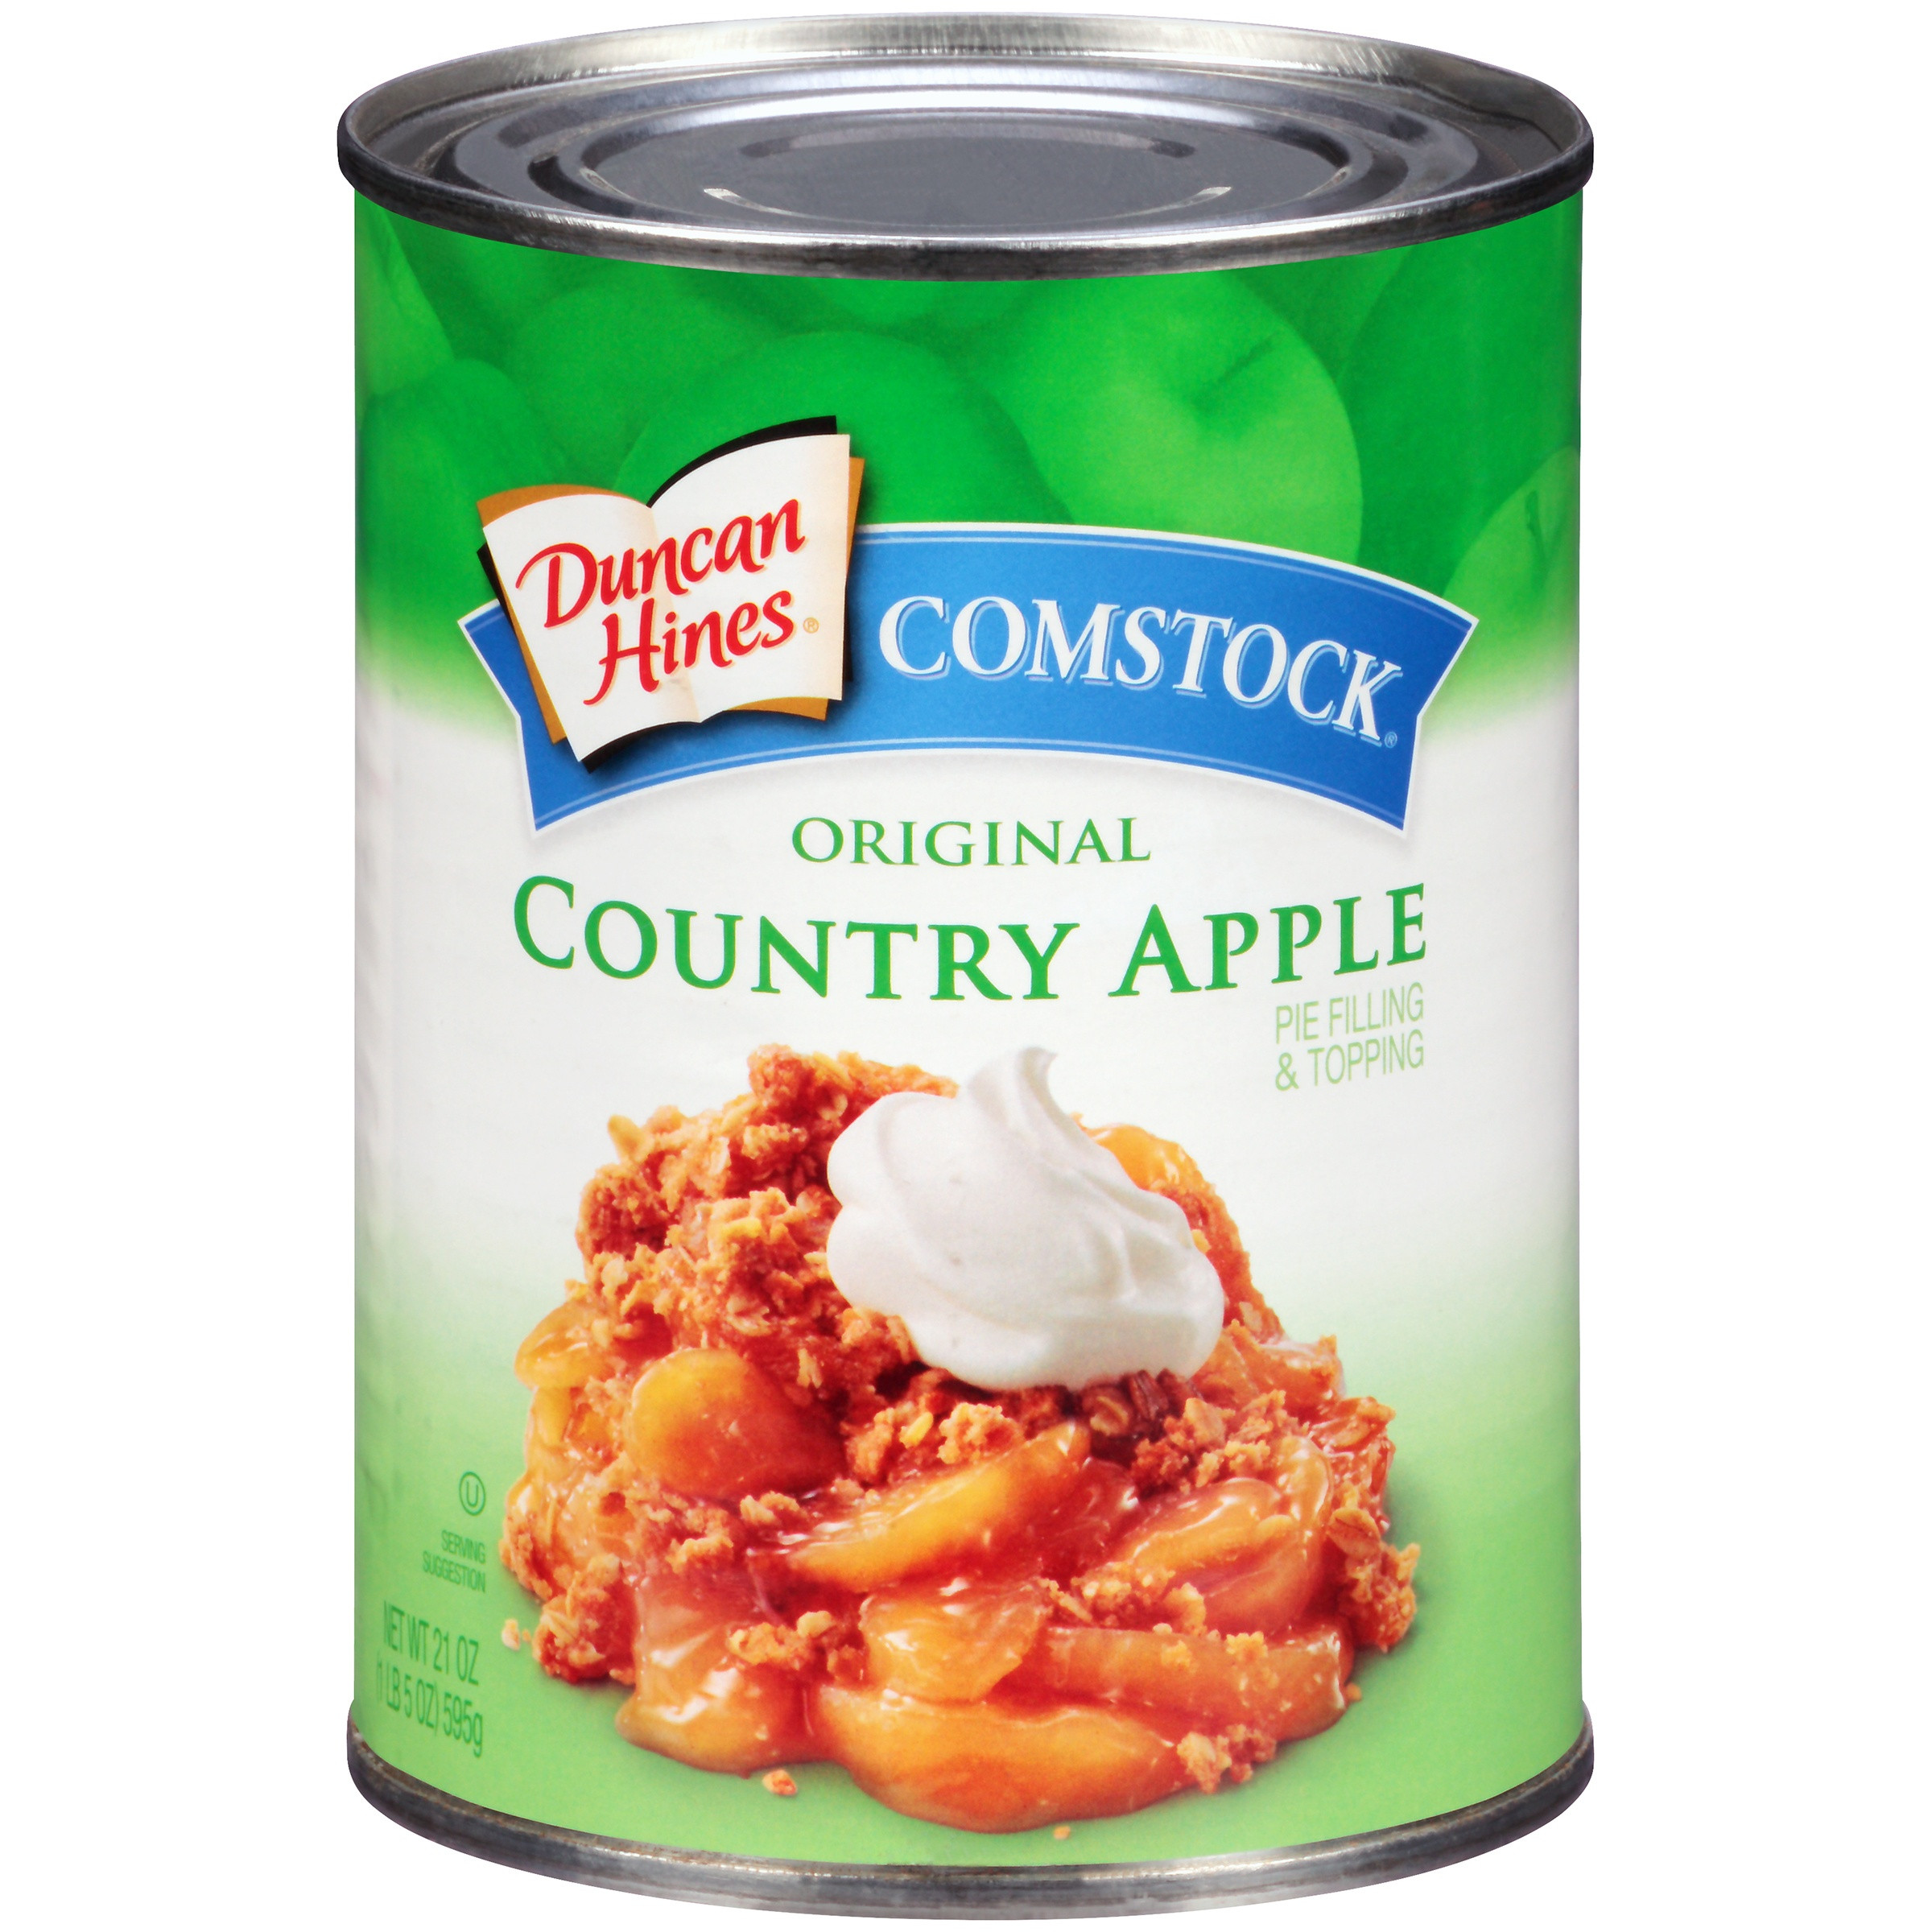 Apple Pie Filling Canning
 stock Original Country Apple Pie Filling or Topping 21